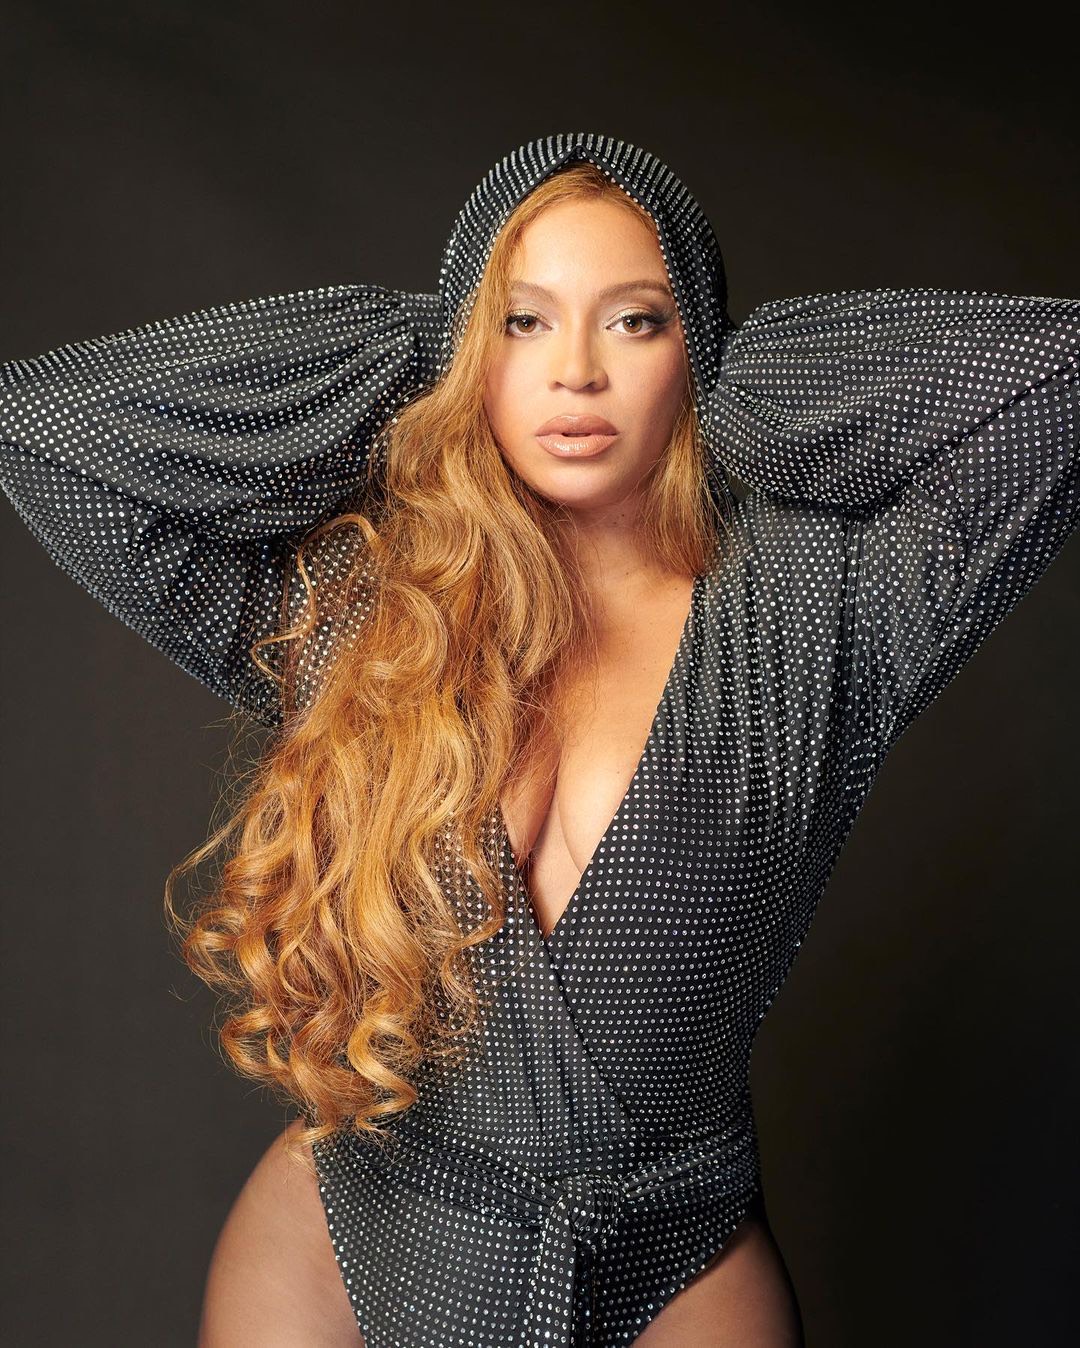 Beyoncé’s is giving away 2 Mil to underserved students in entrepreneurs